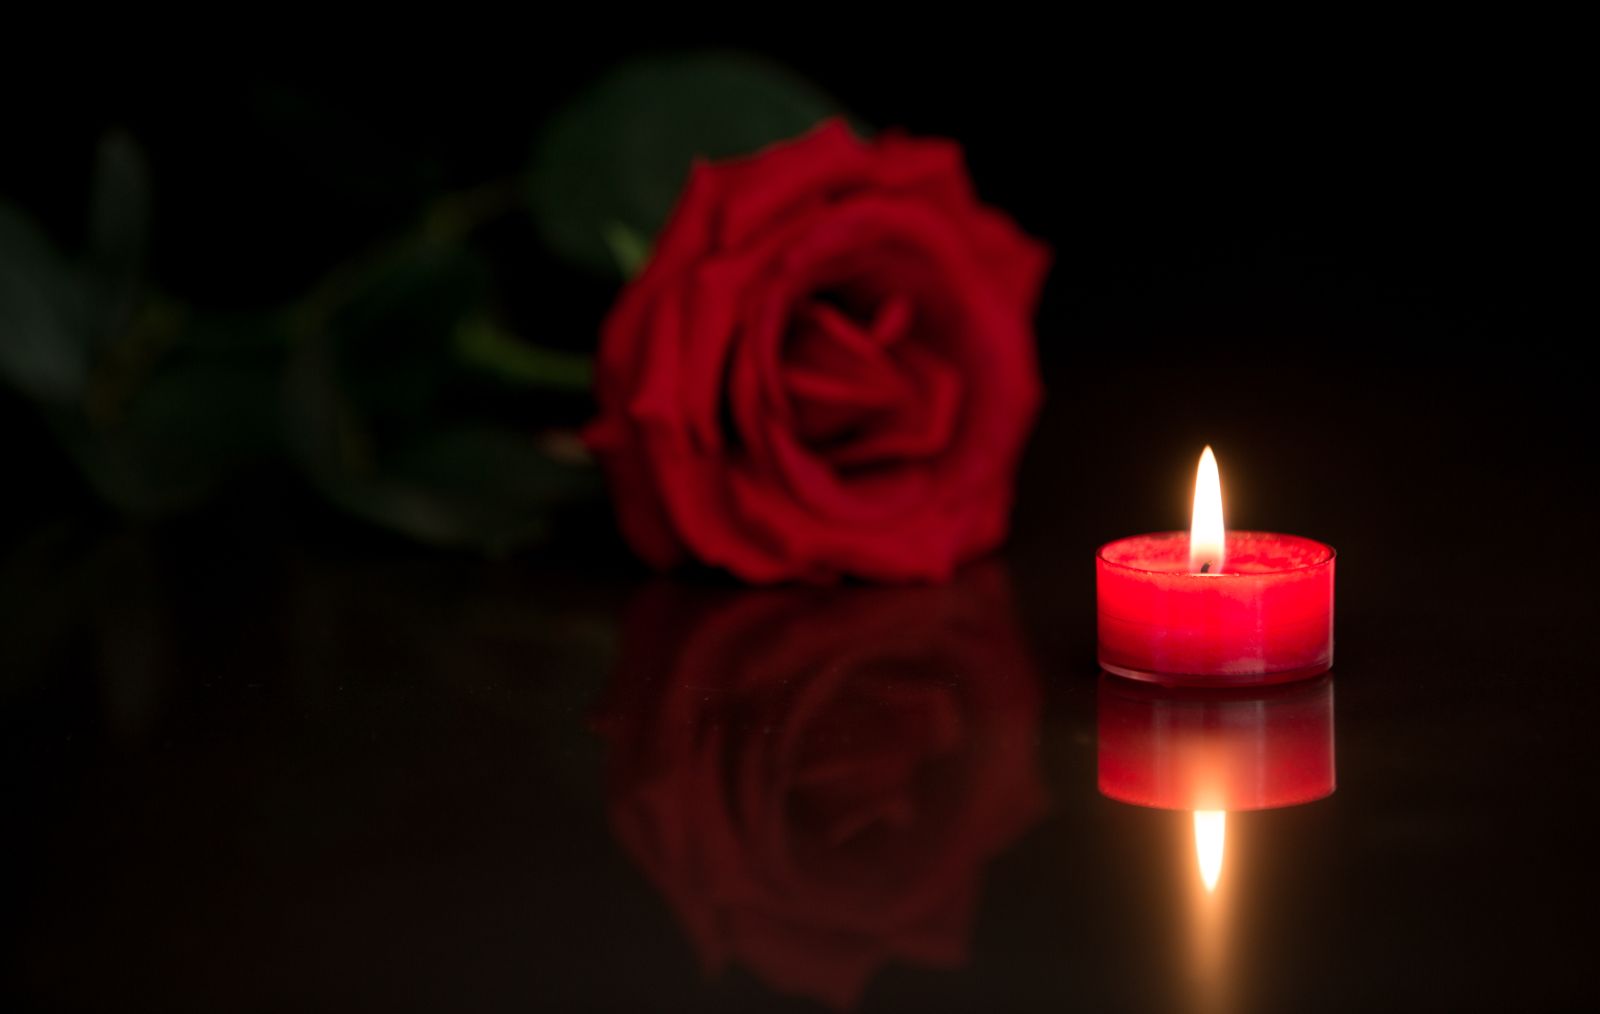 CAndle%20and%20Rose%20solemn.jpg